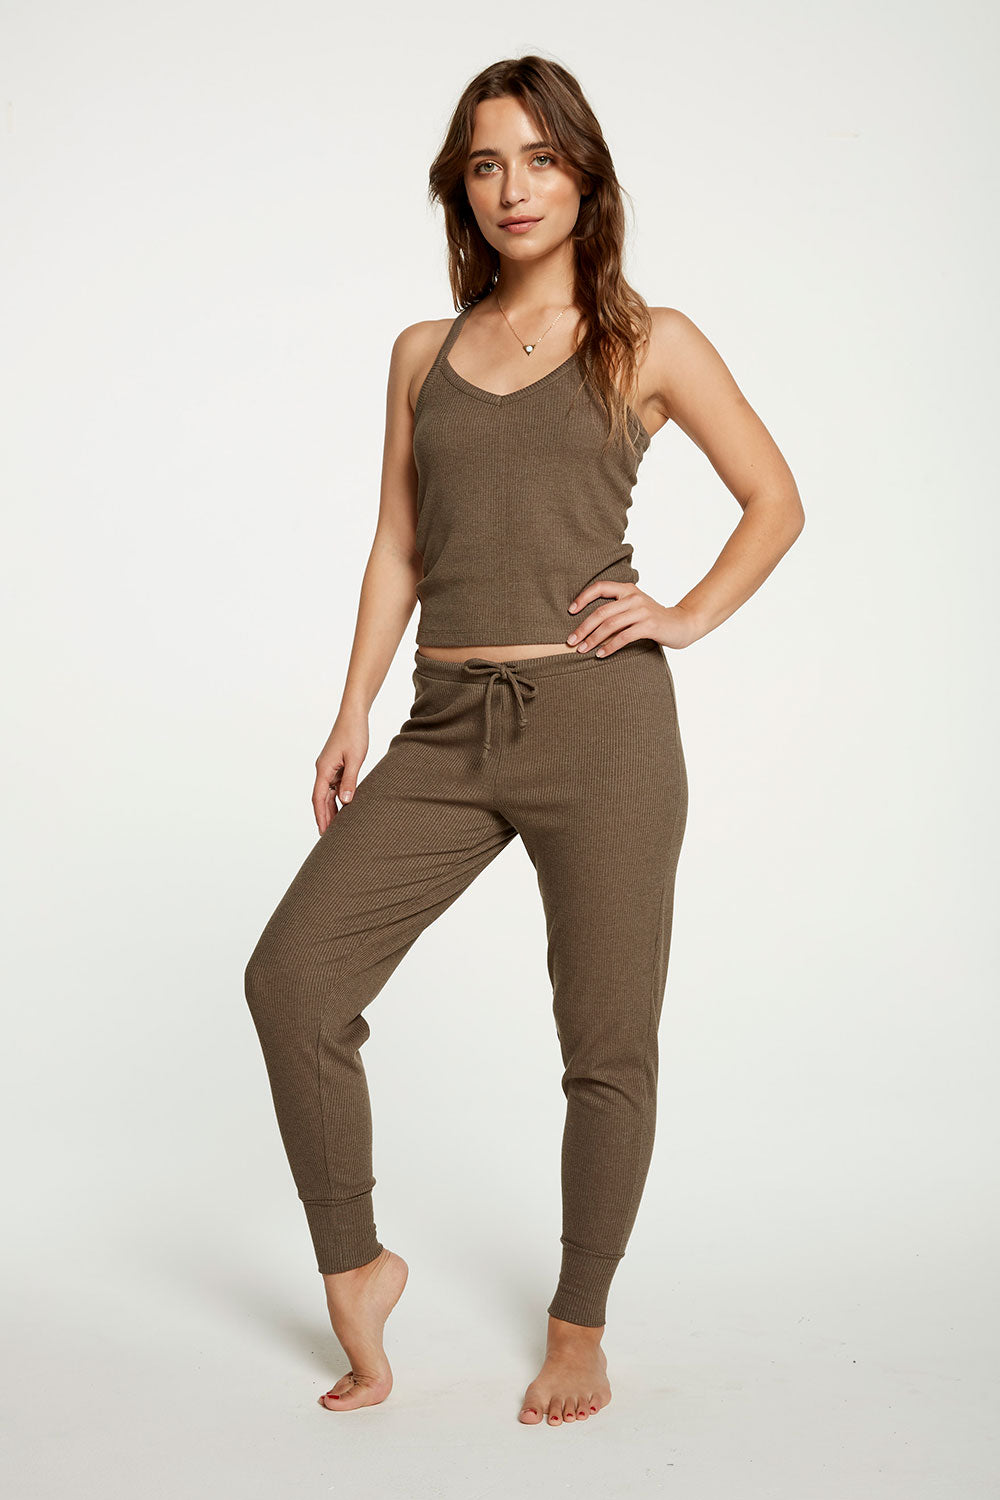 Cozy Rib Cropped Double V Cami WOMENS - chaserbrand